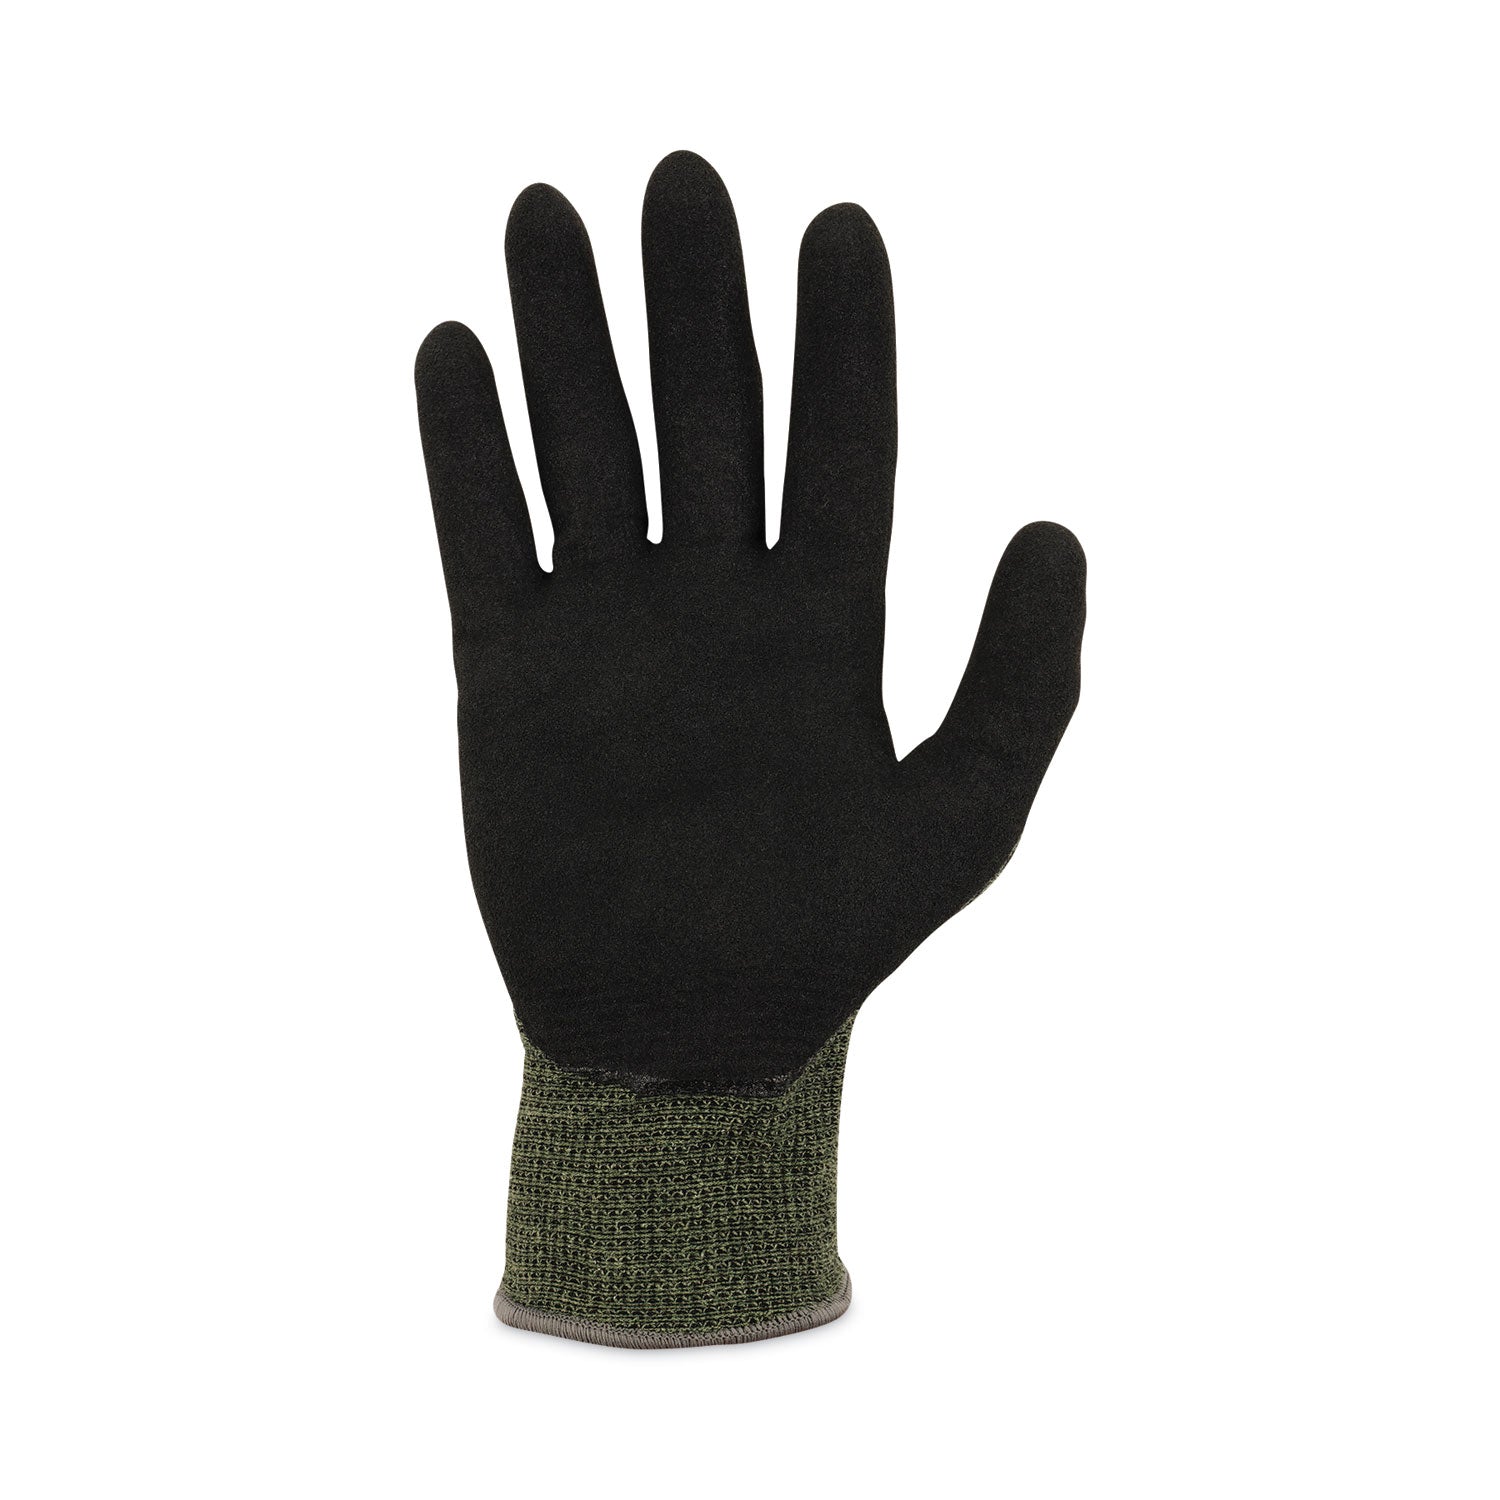 proflex-7042-ansi-a4-nitrile-coated-cr-gloves-green-large-12-pairs-pack-ships-in-1-3-business-days_ego10334 - 6